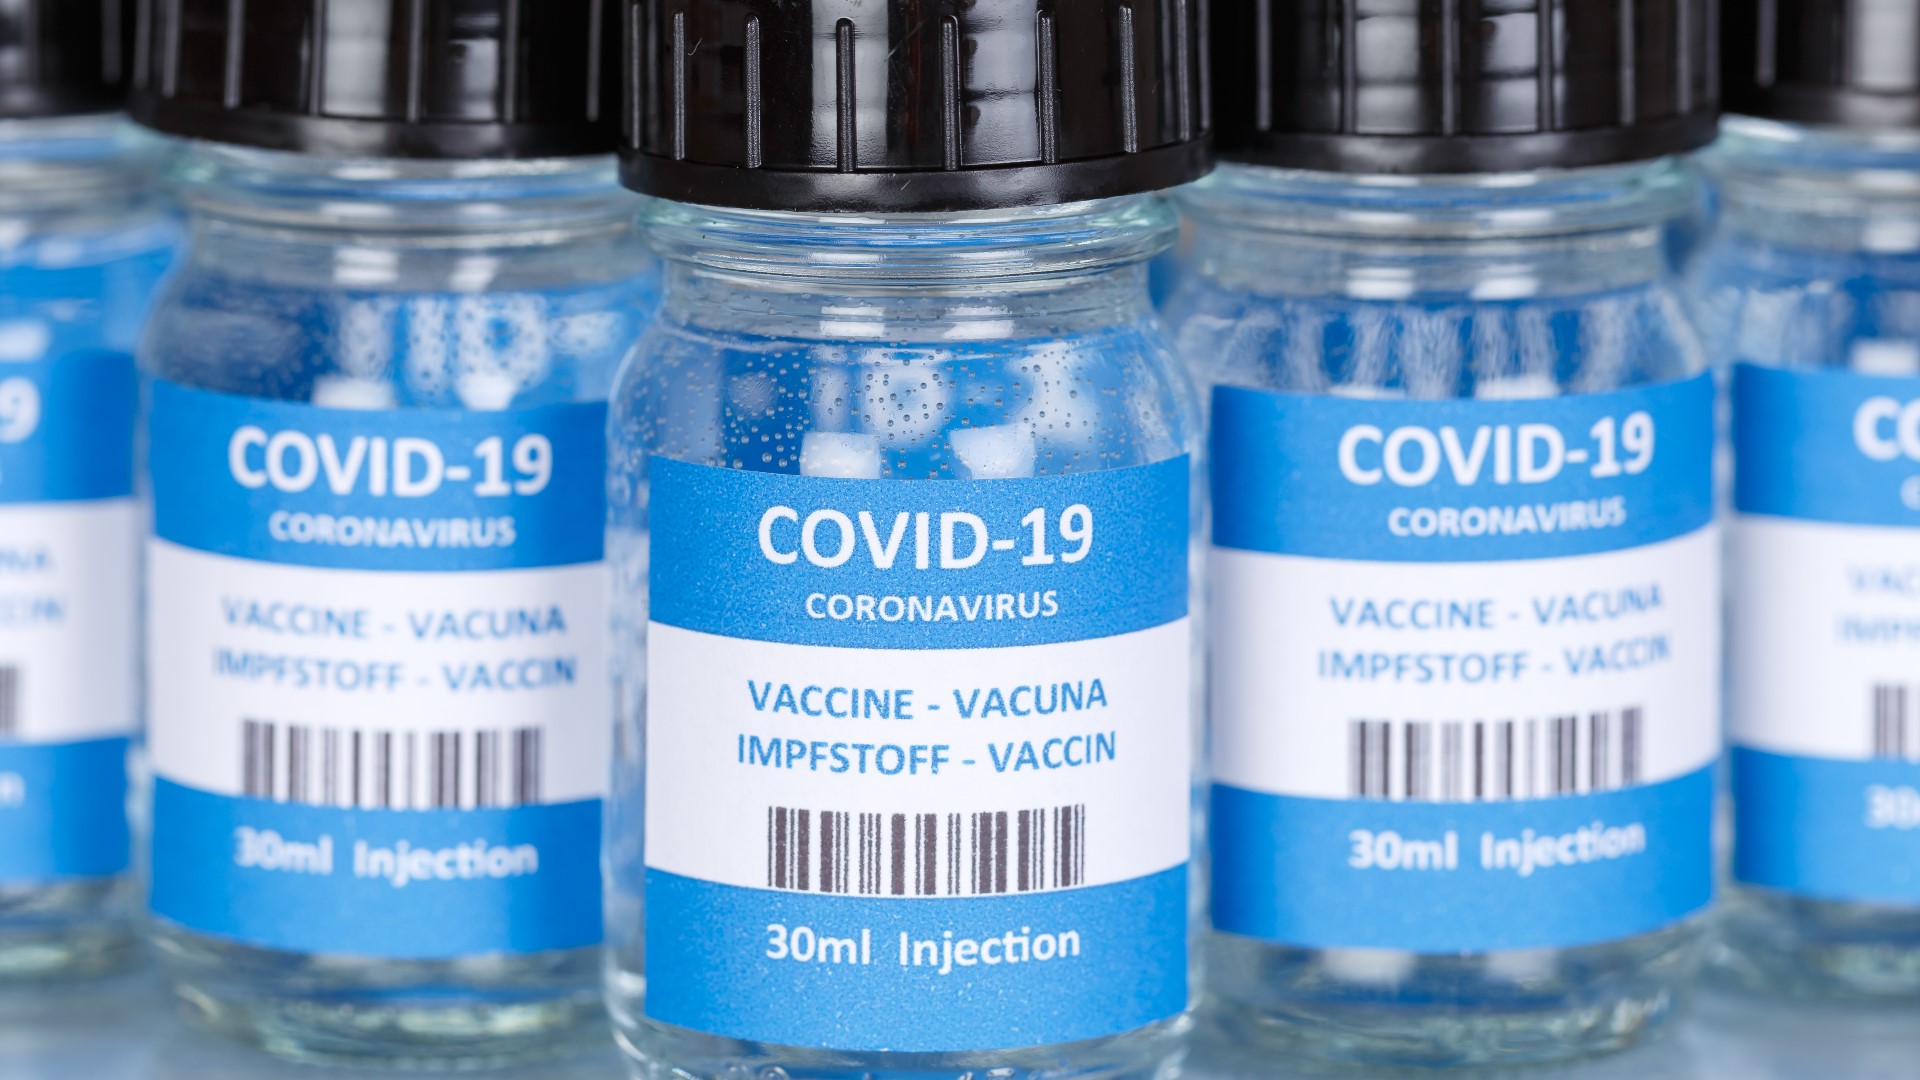 It's going to be a while before we know how much of the population needs to be vaccinated to establish herd immunity from COVID-19.